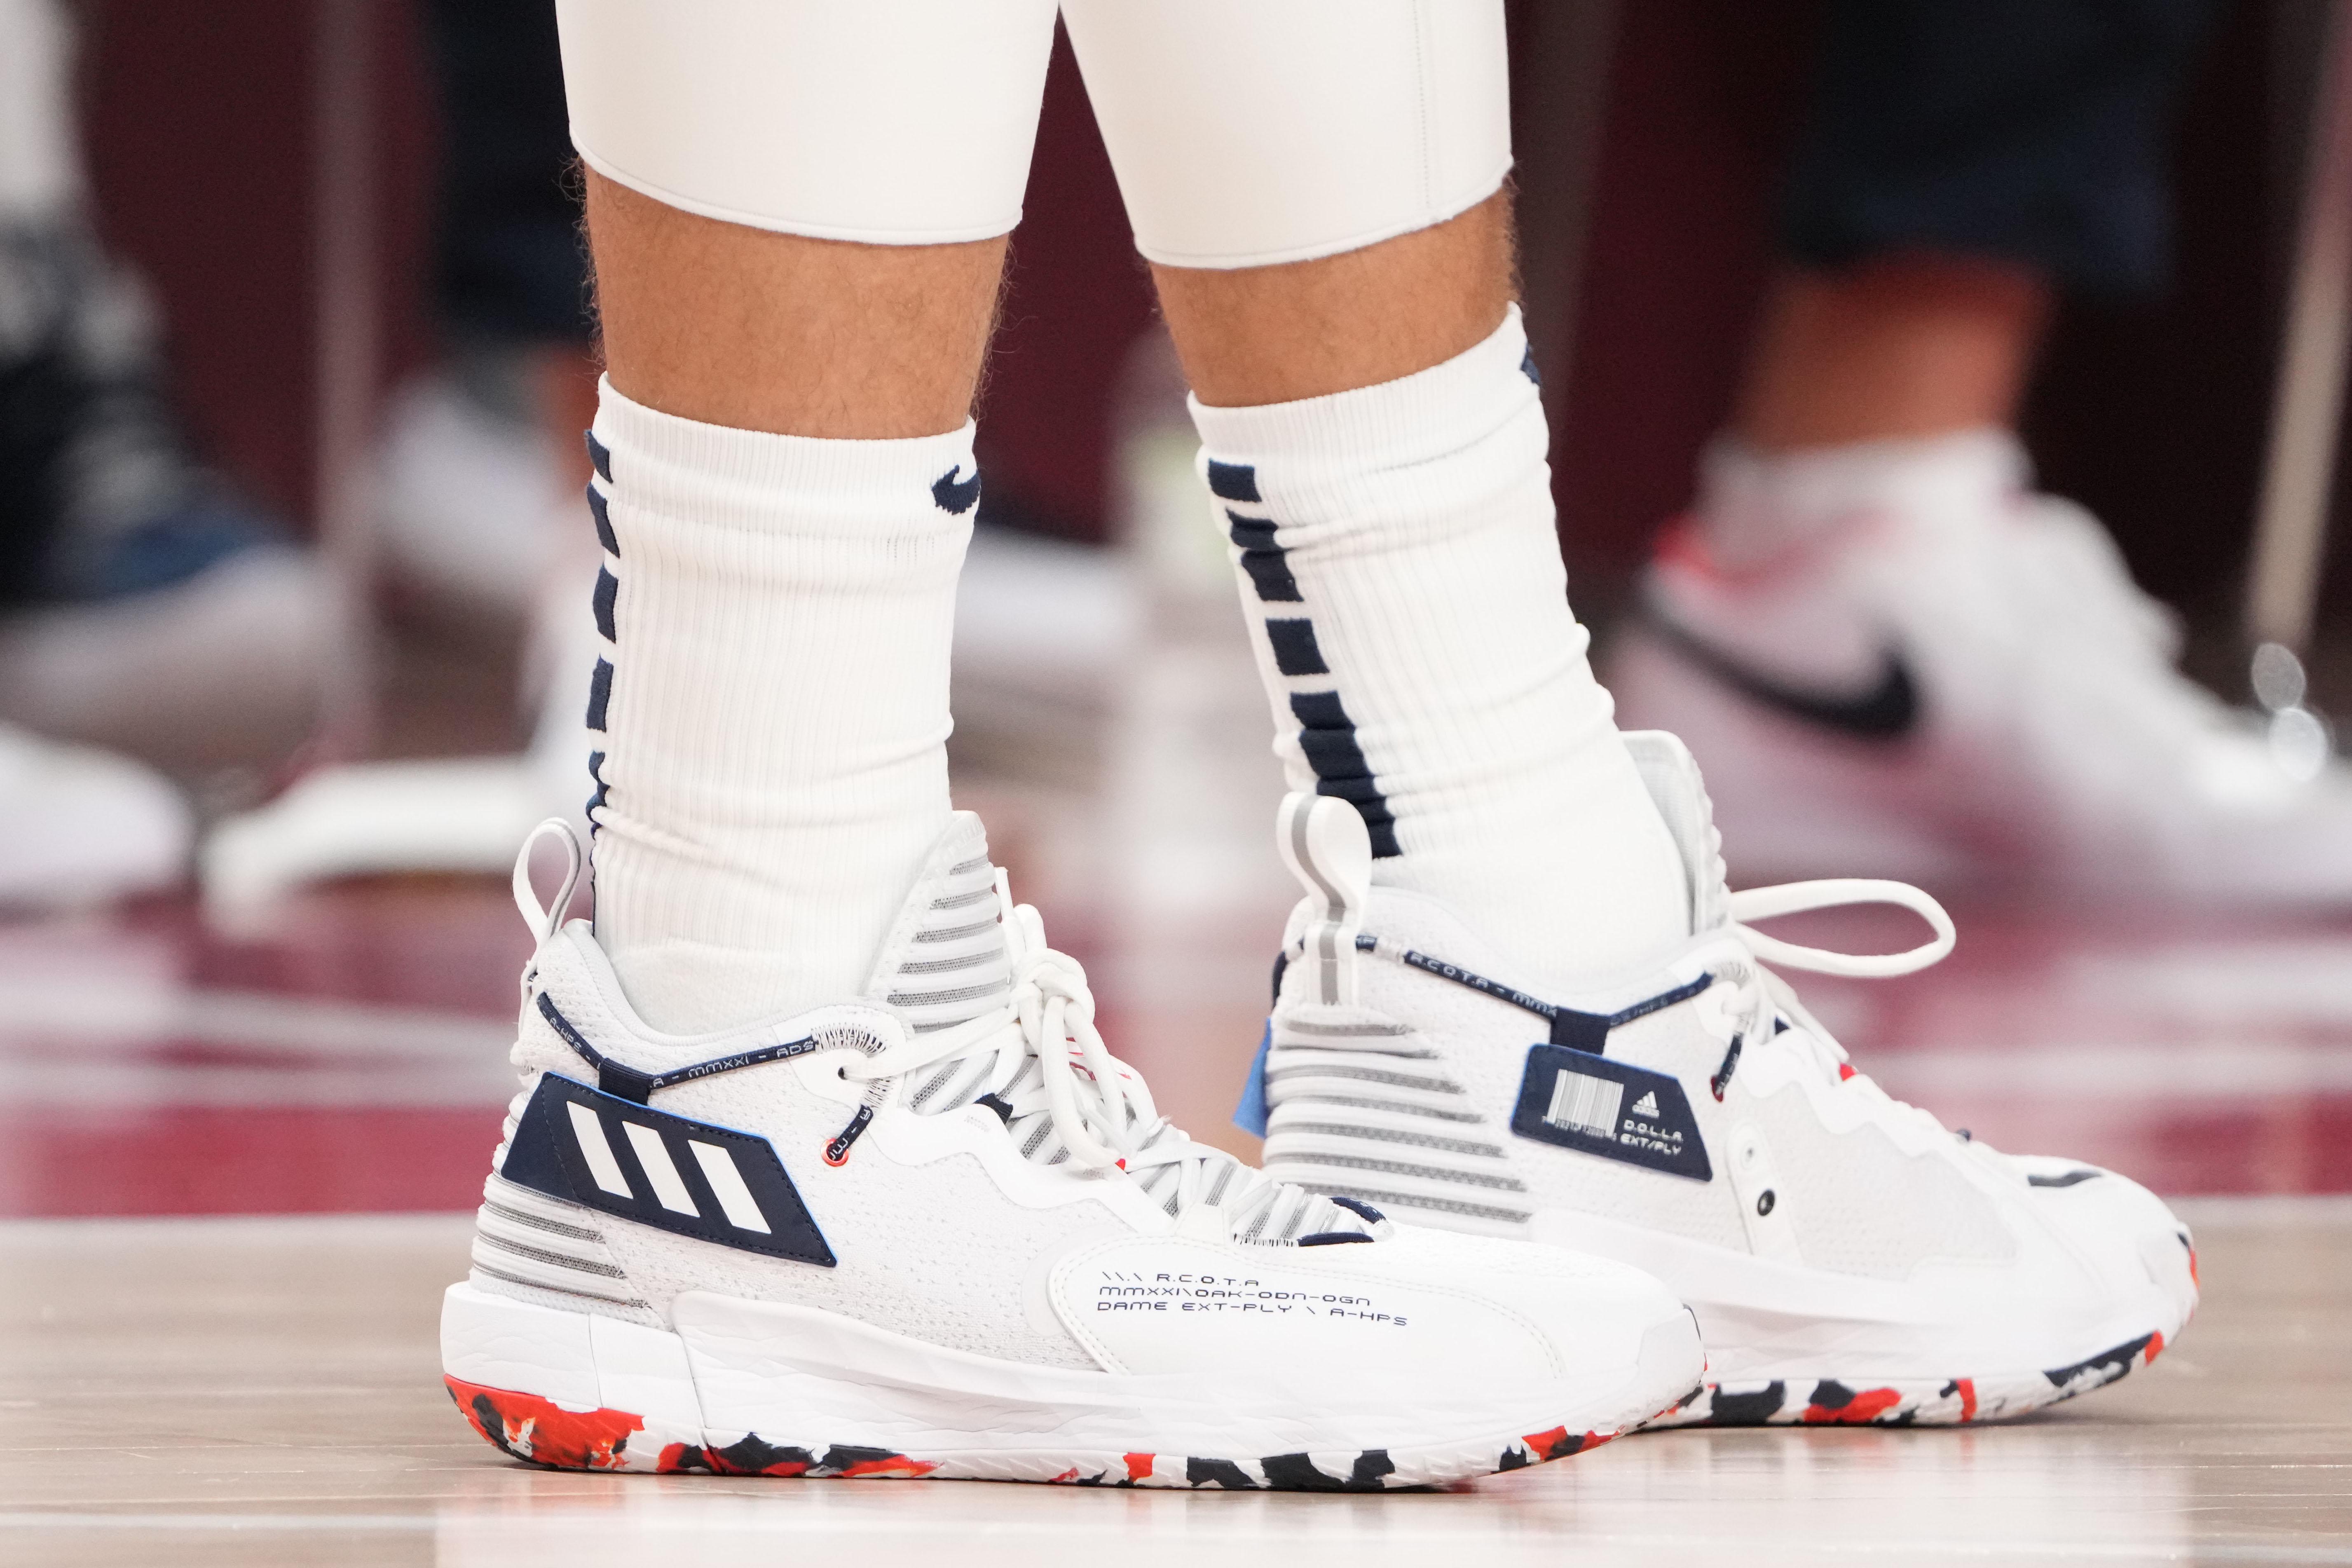 Zach LaVine's white and navy adidas basketball sneakers.